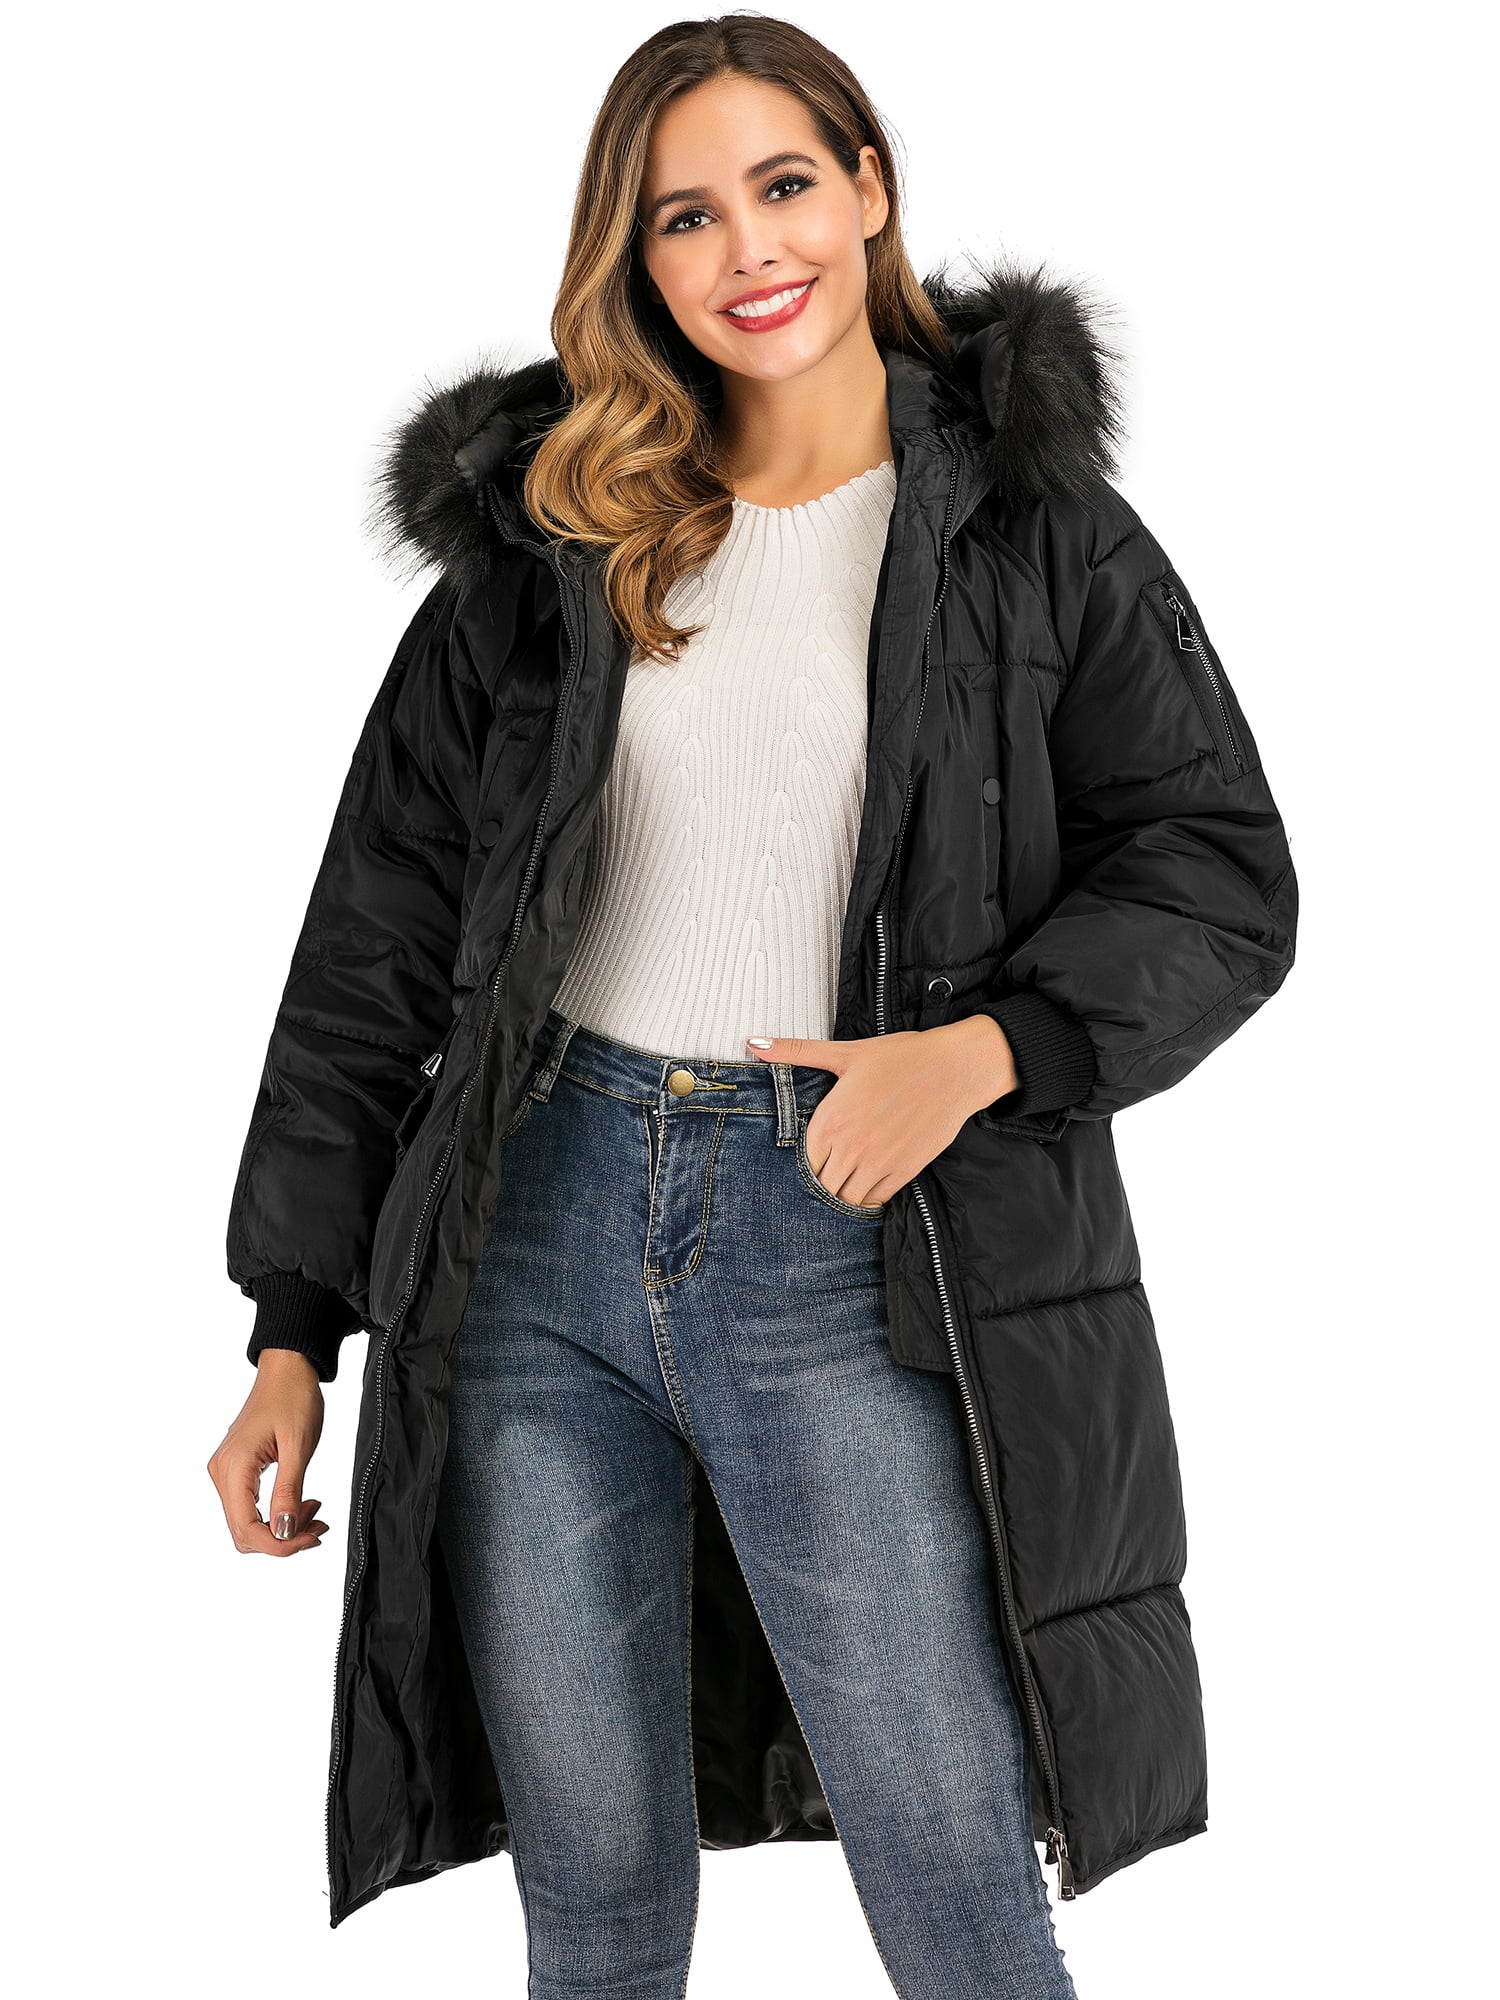 BAG WIZARD - Women's Heavy Puffer Long Coat Thickened Hooded Down ...